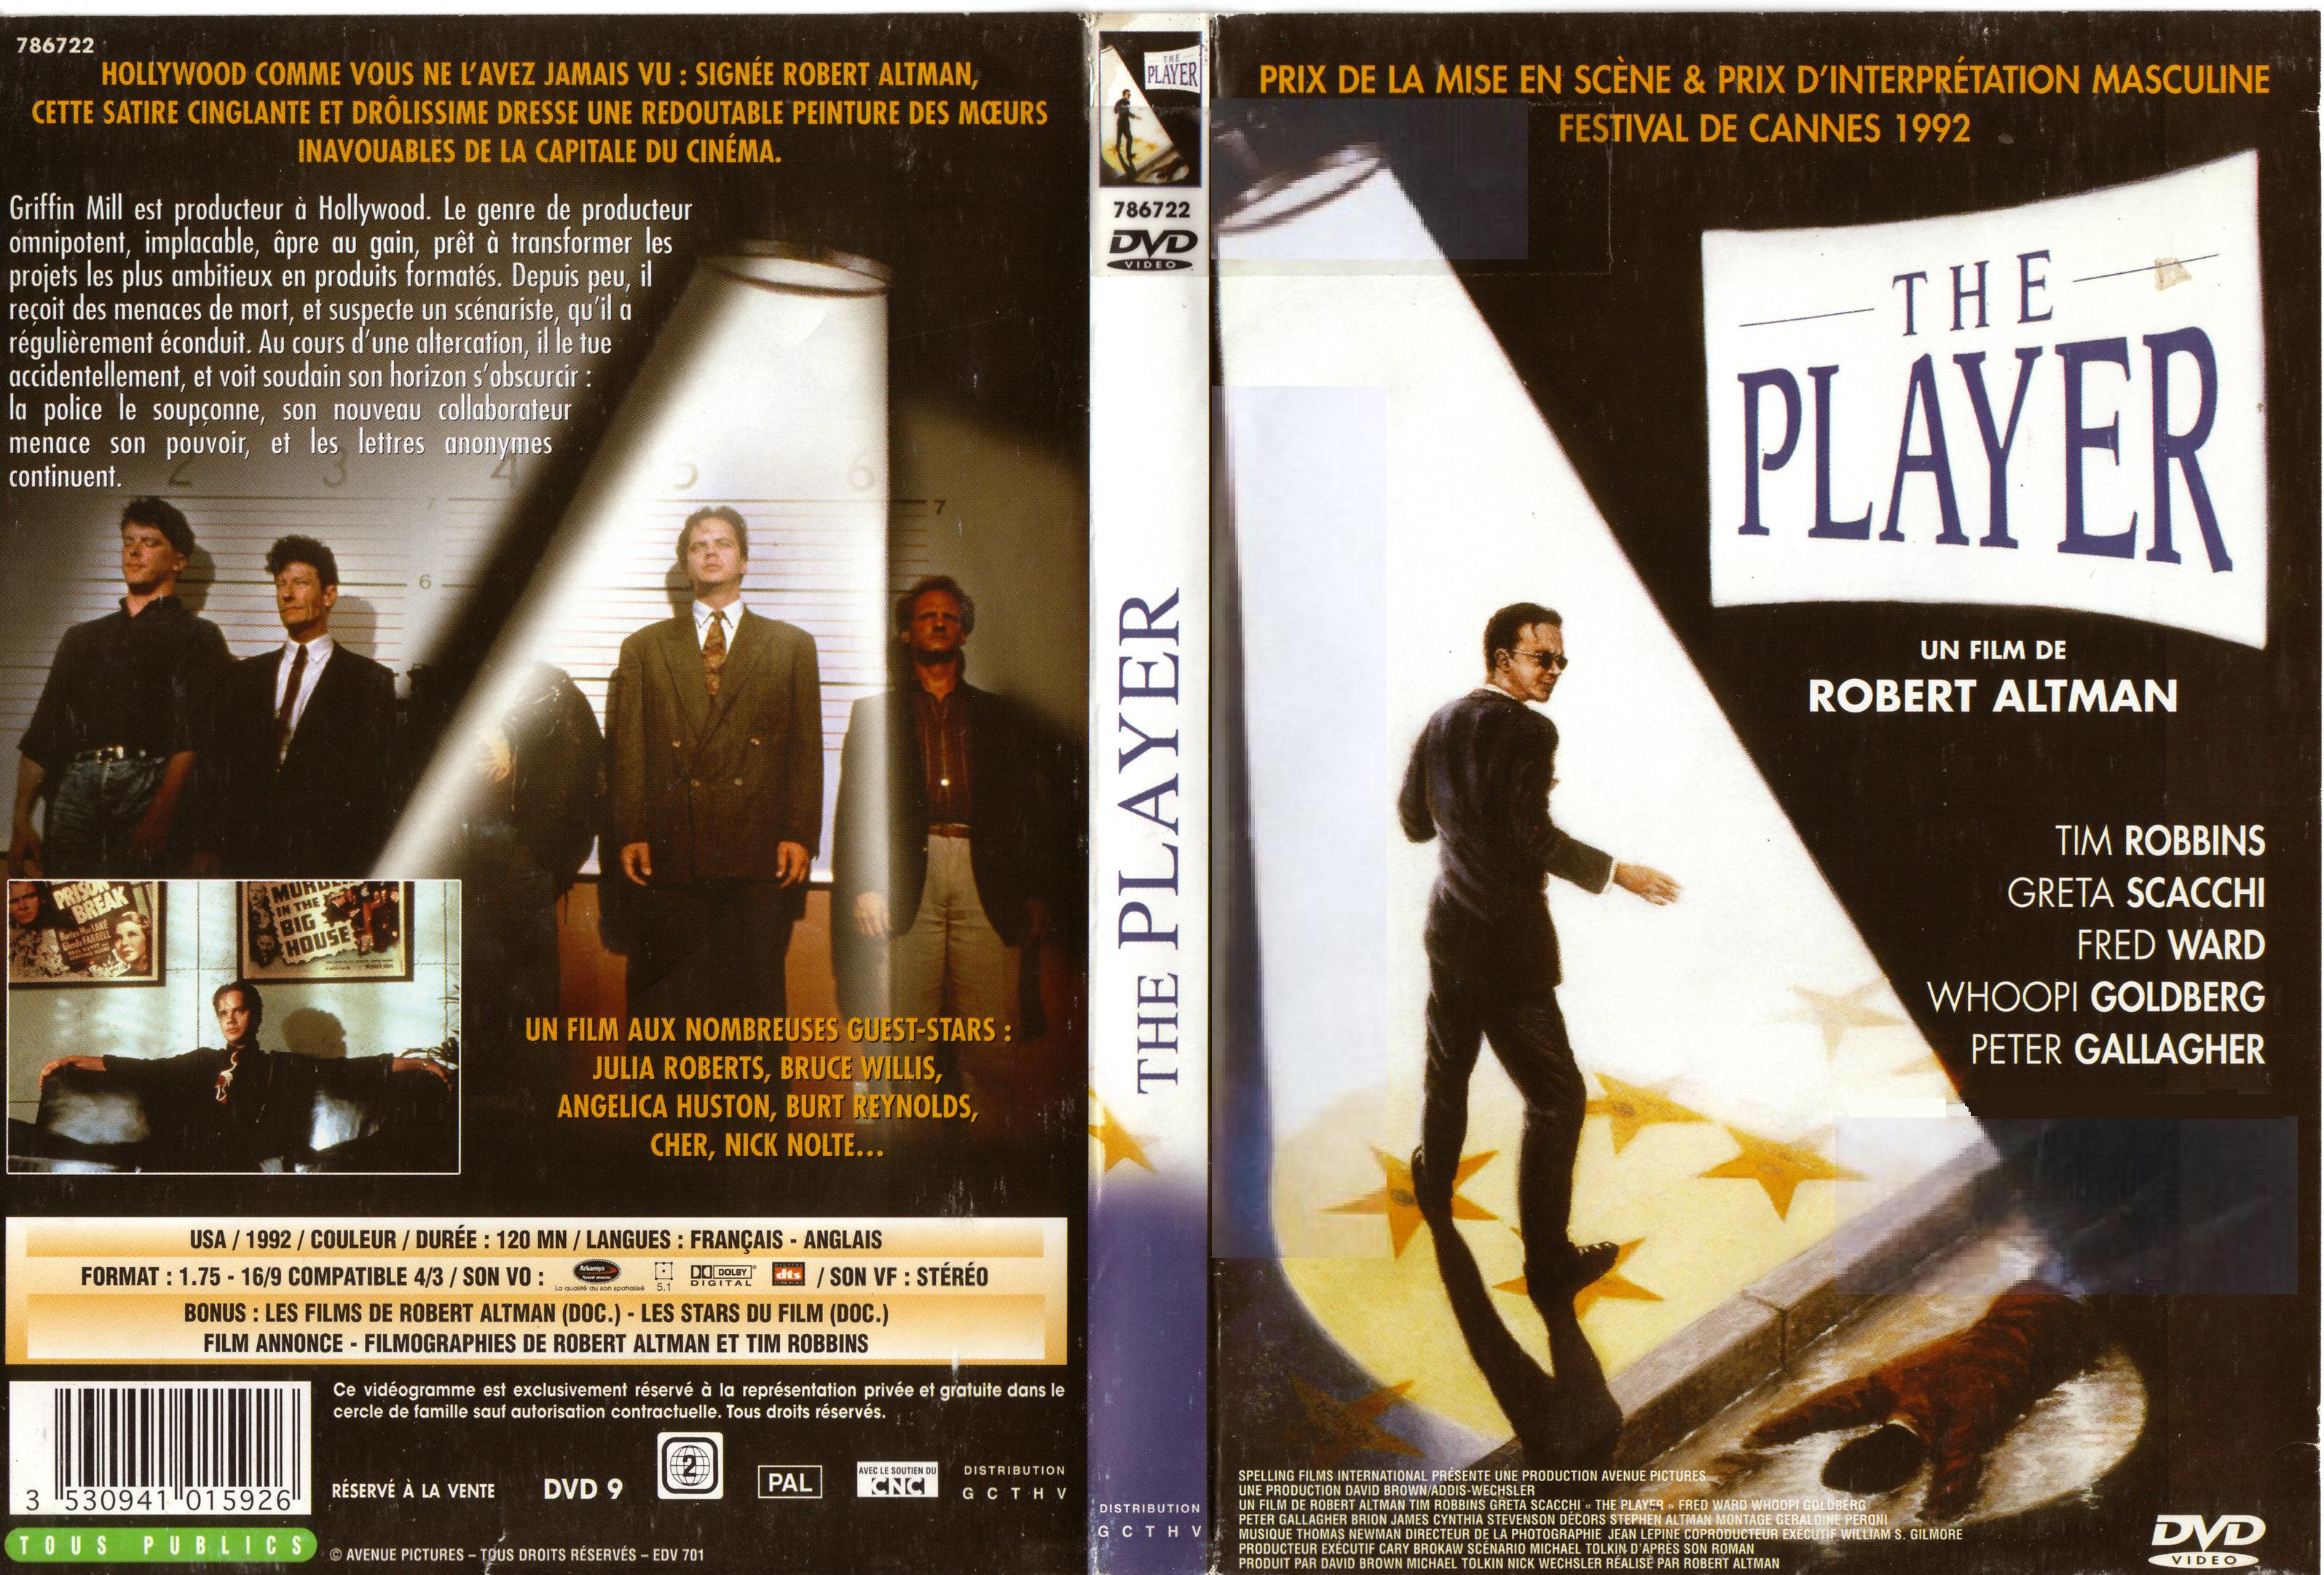 Jaquette DVD The player